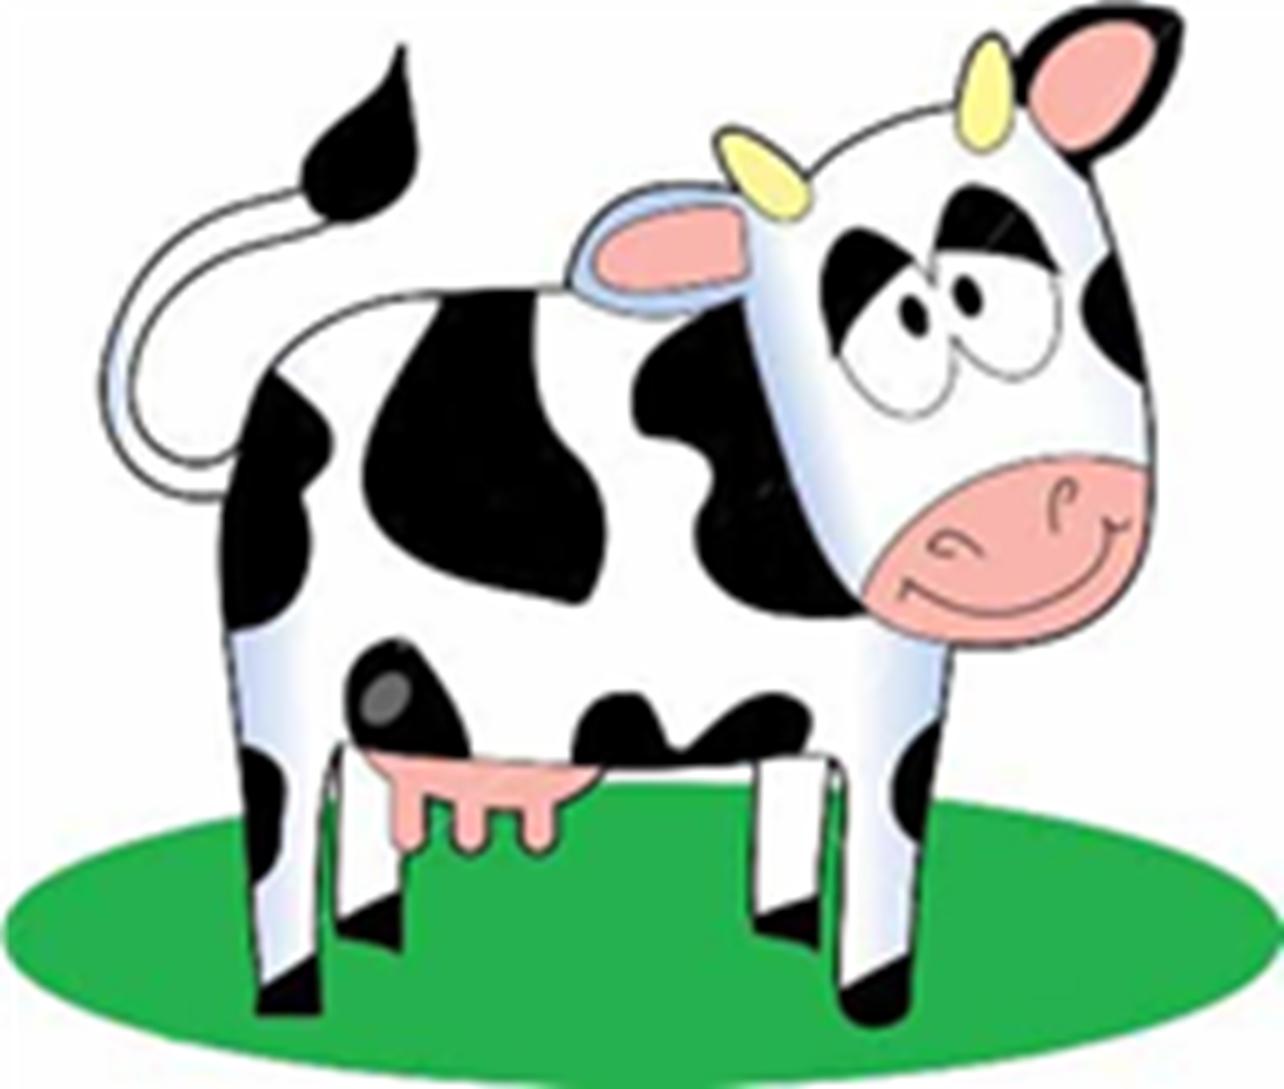 Cow Plop Bingo is back � win $1,000 and support our kids 